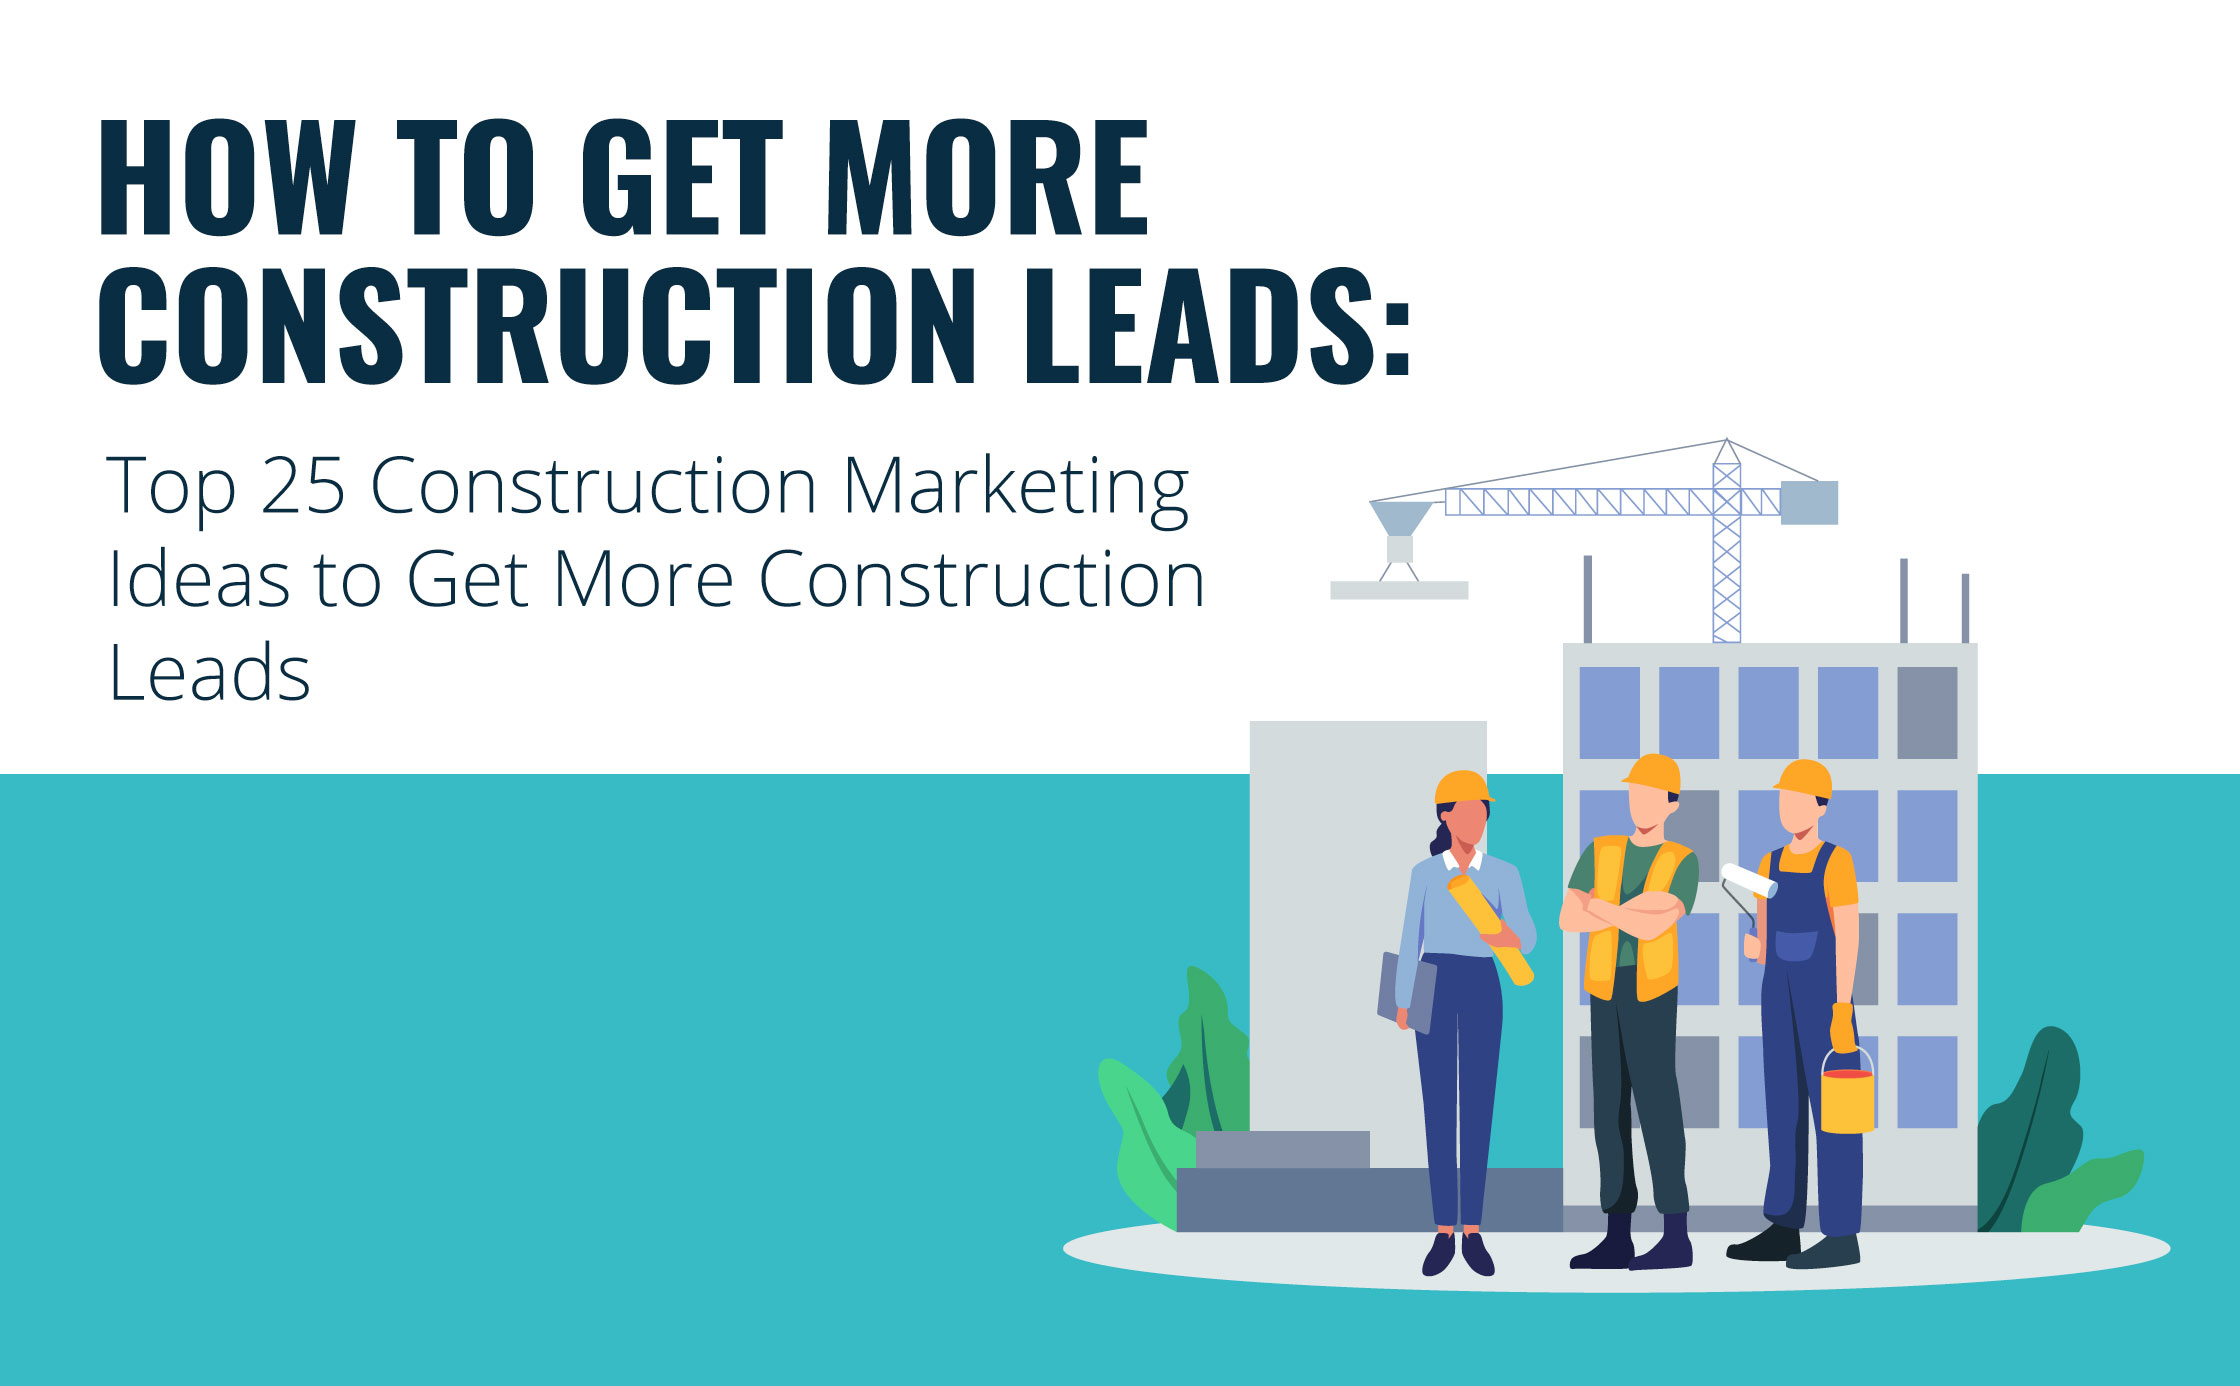 Top 25 Construction Marketing Ideas to Get More Construction Leads